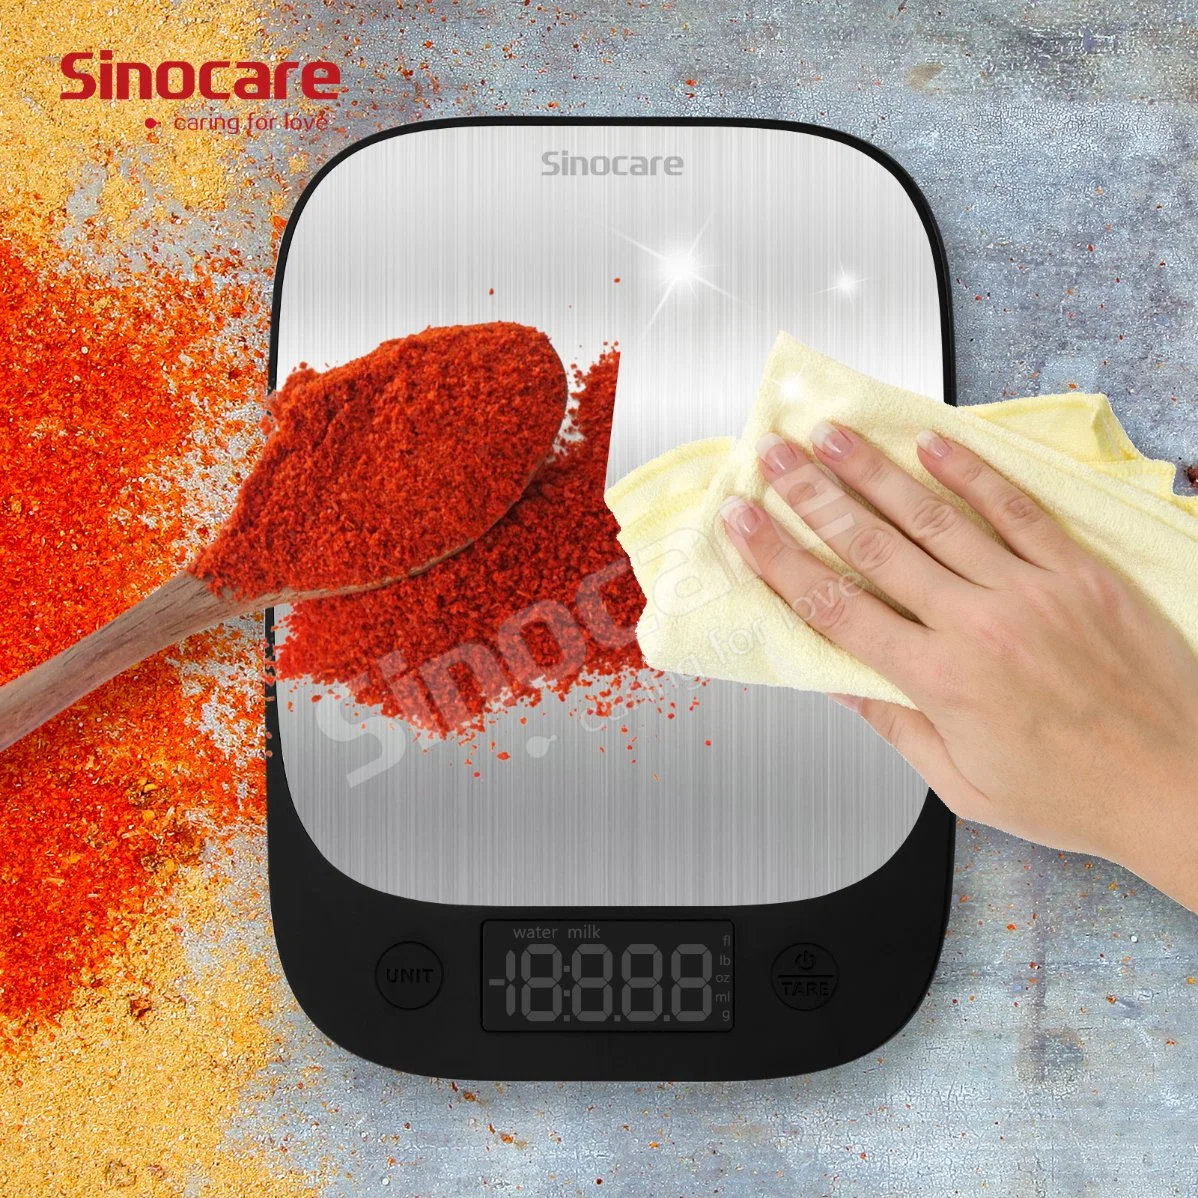 Sinocare Kitchen Scale LCD Precision Scale Electronic Jewelry Scales Weight Balance Kitchen Scale for Tea Baking Digital Weighing